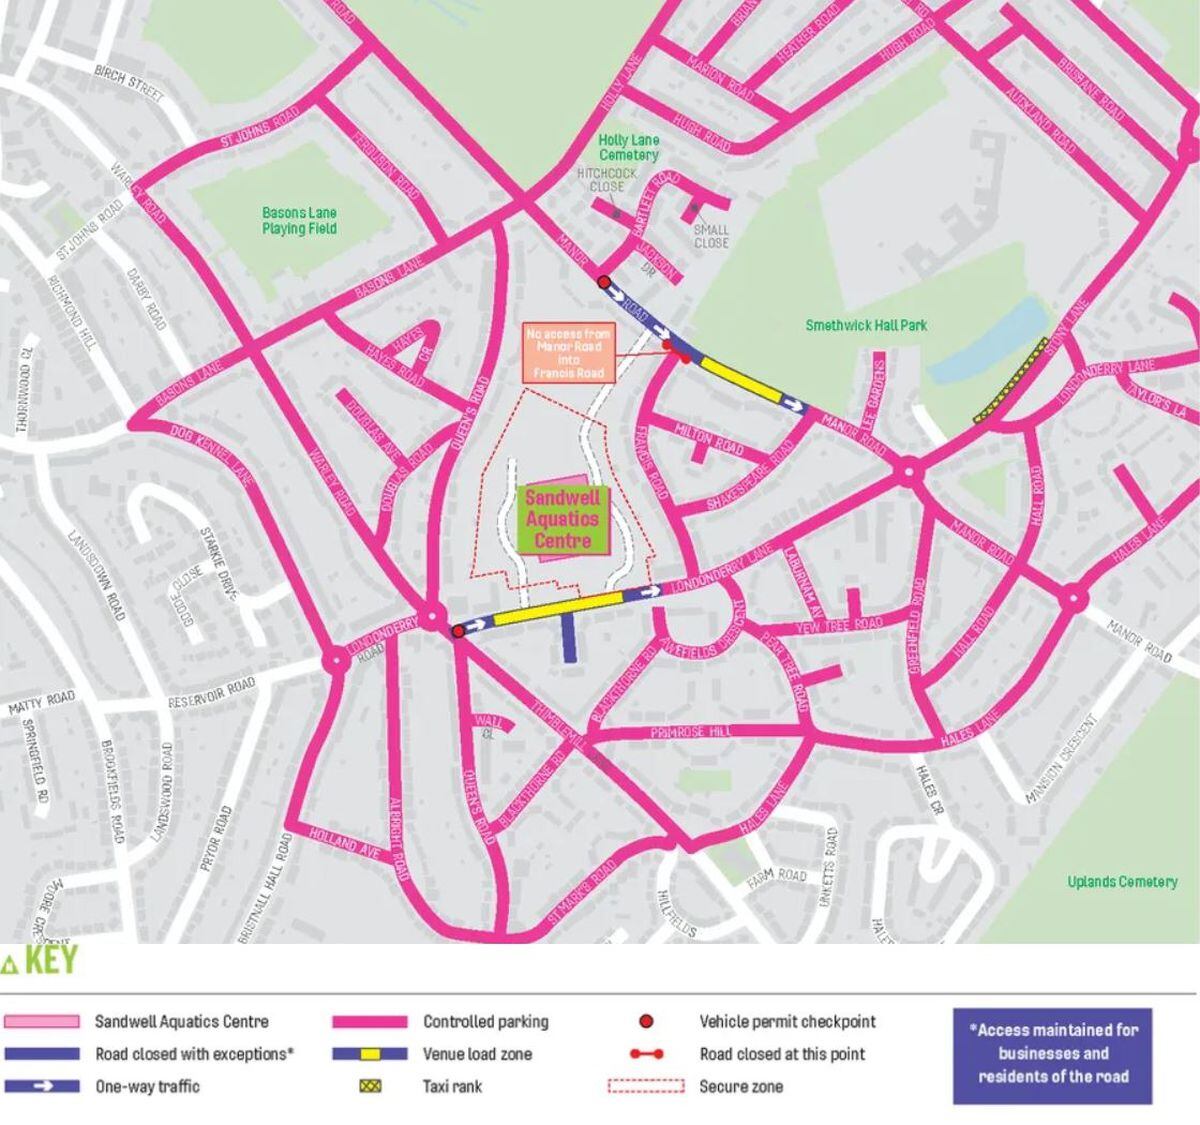 The map of road restrictions in Sandwell